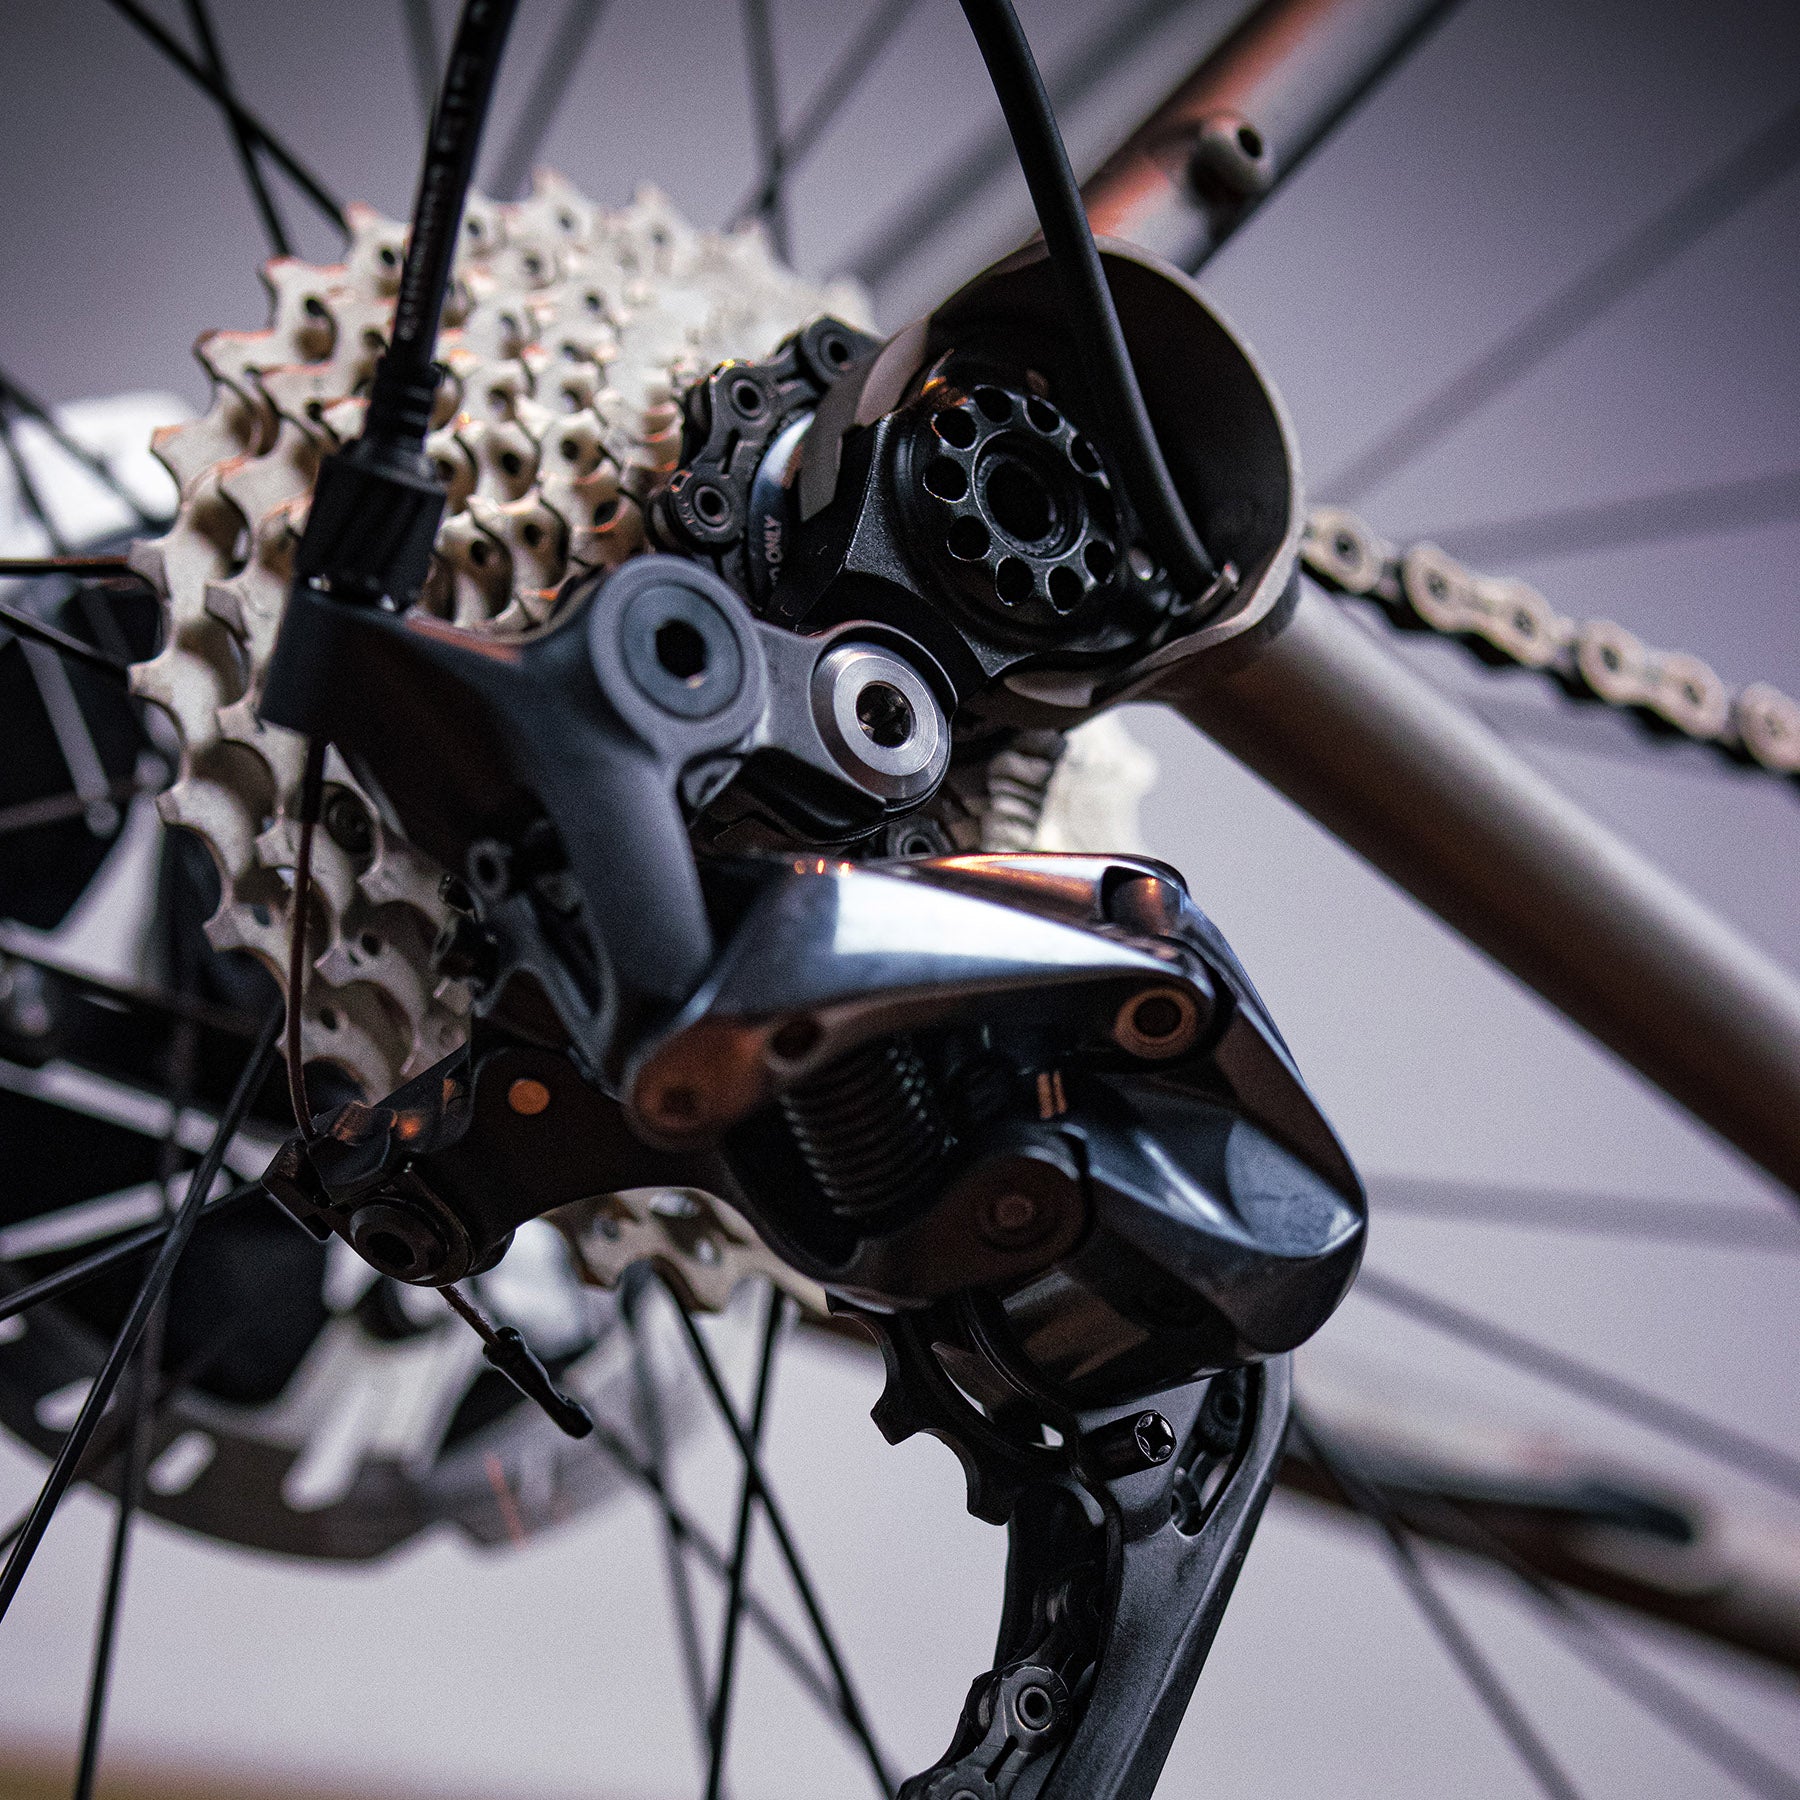 Image features the back wheel and gears on the BSC Ti road bike